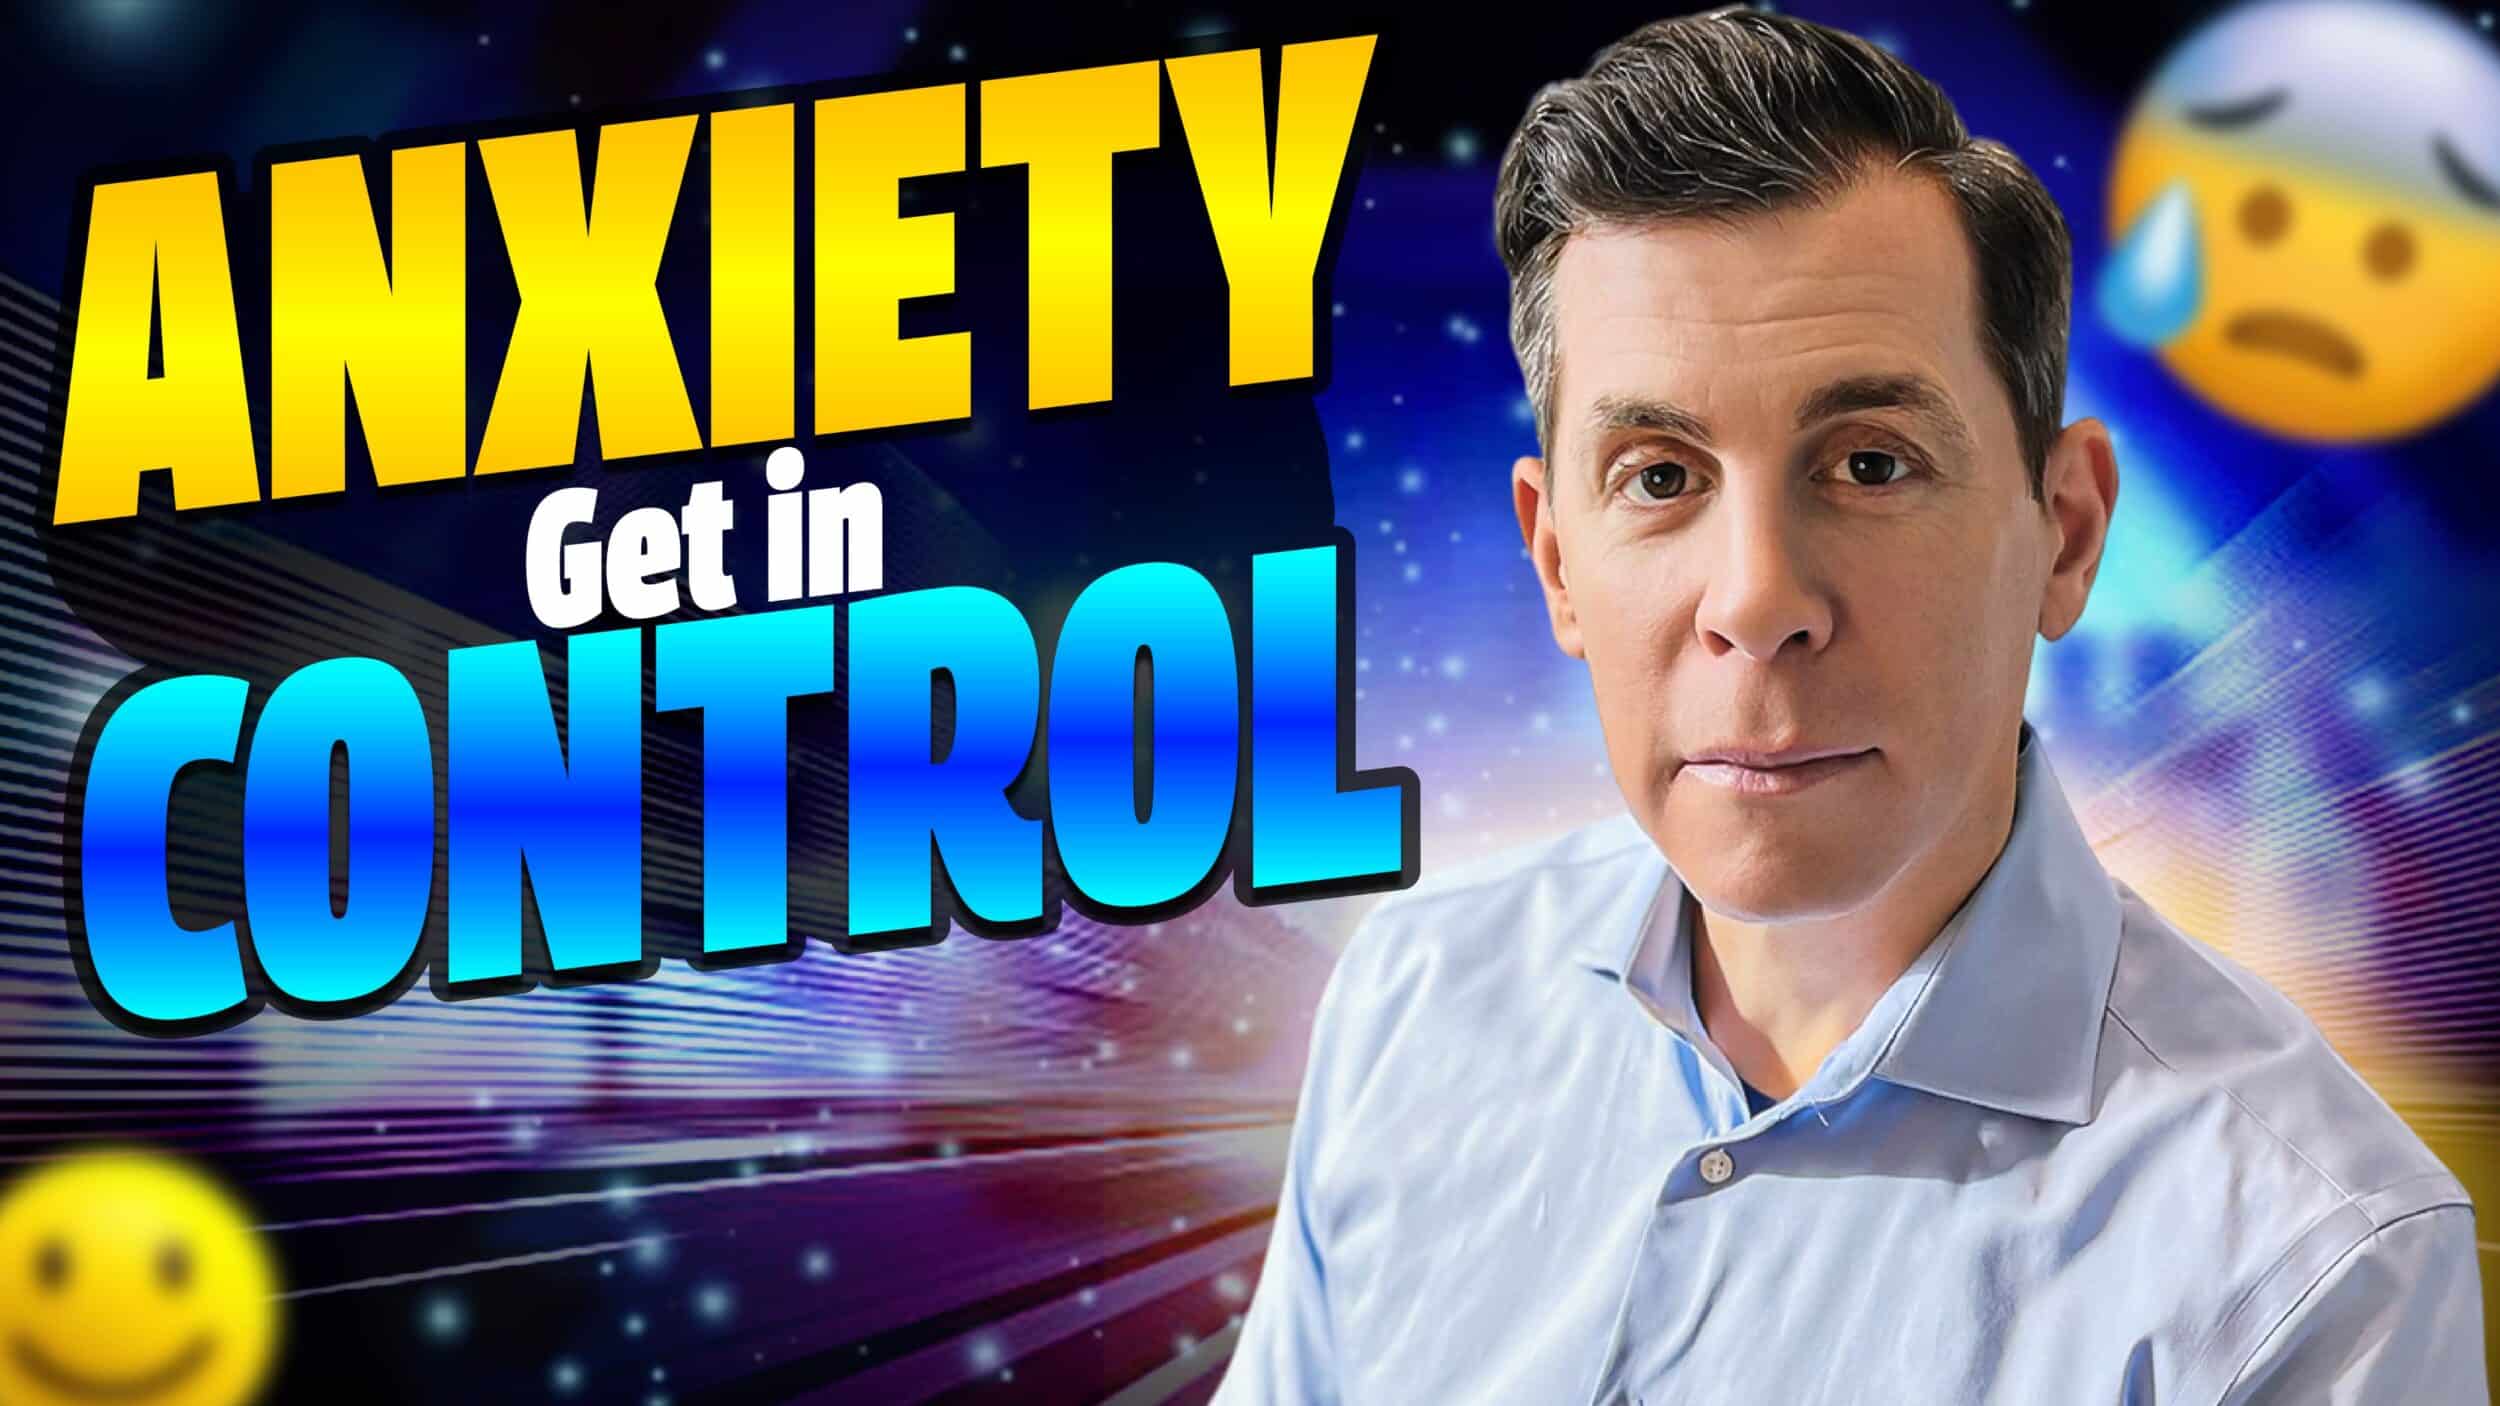 Thumbnail Anxiety get in Control 17 Mazzella